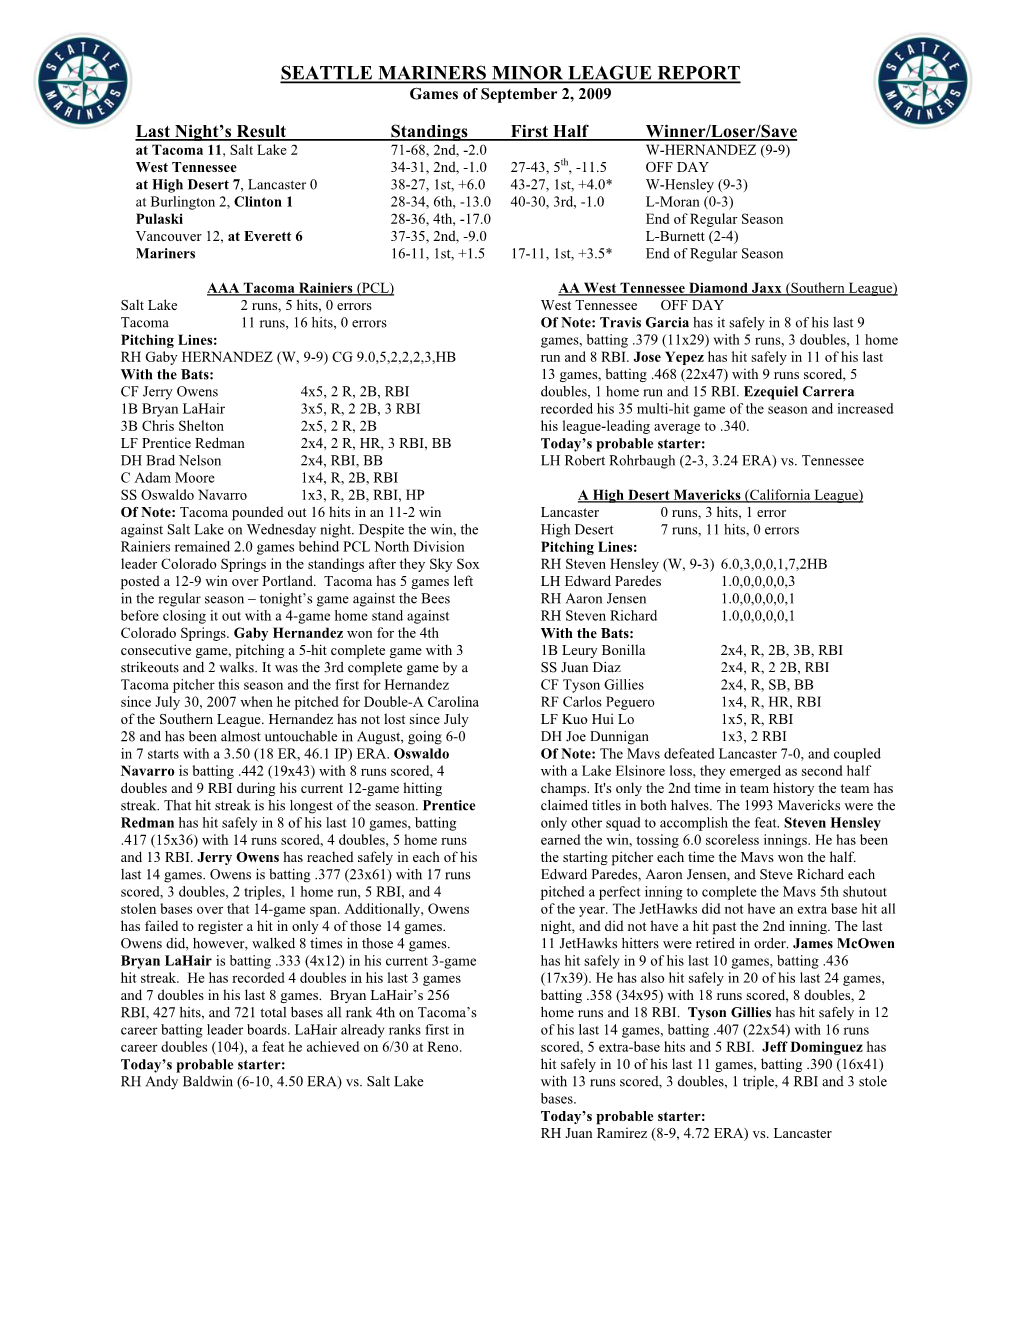 SEATTLE MARINERS MINOR LEAGUE REPORT Games of September 2, 2009